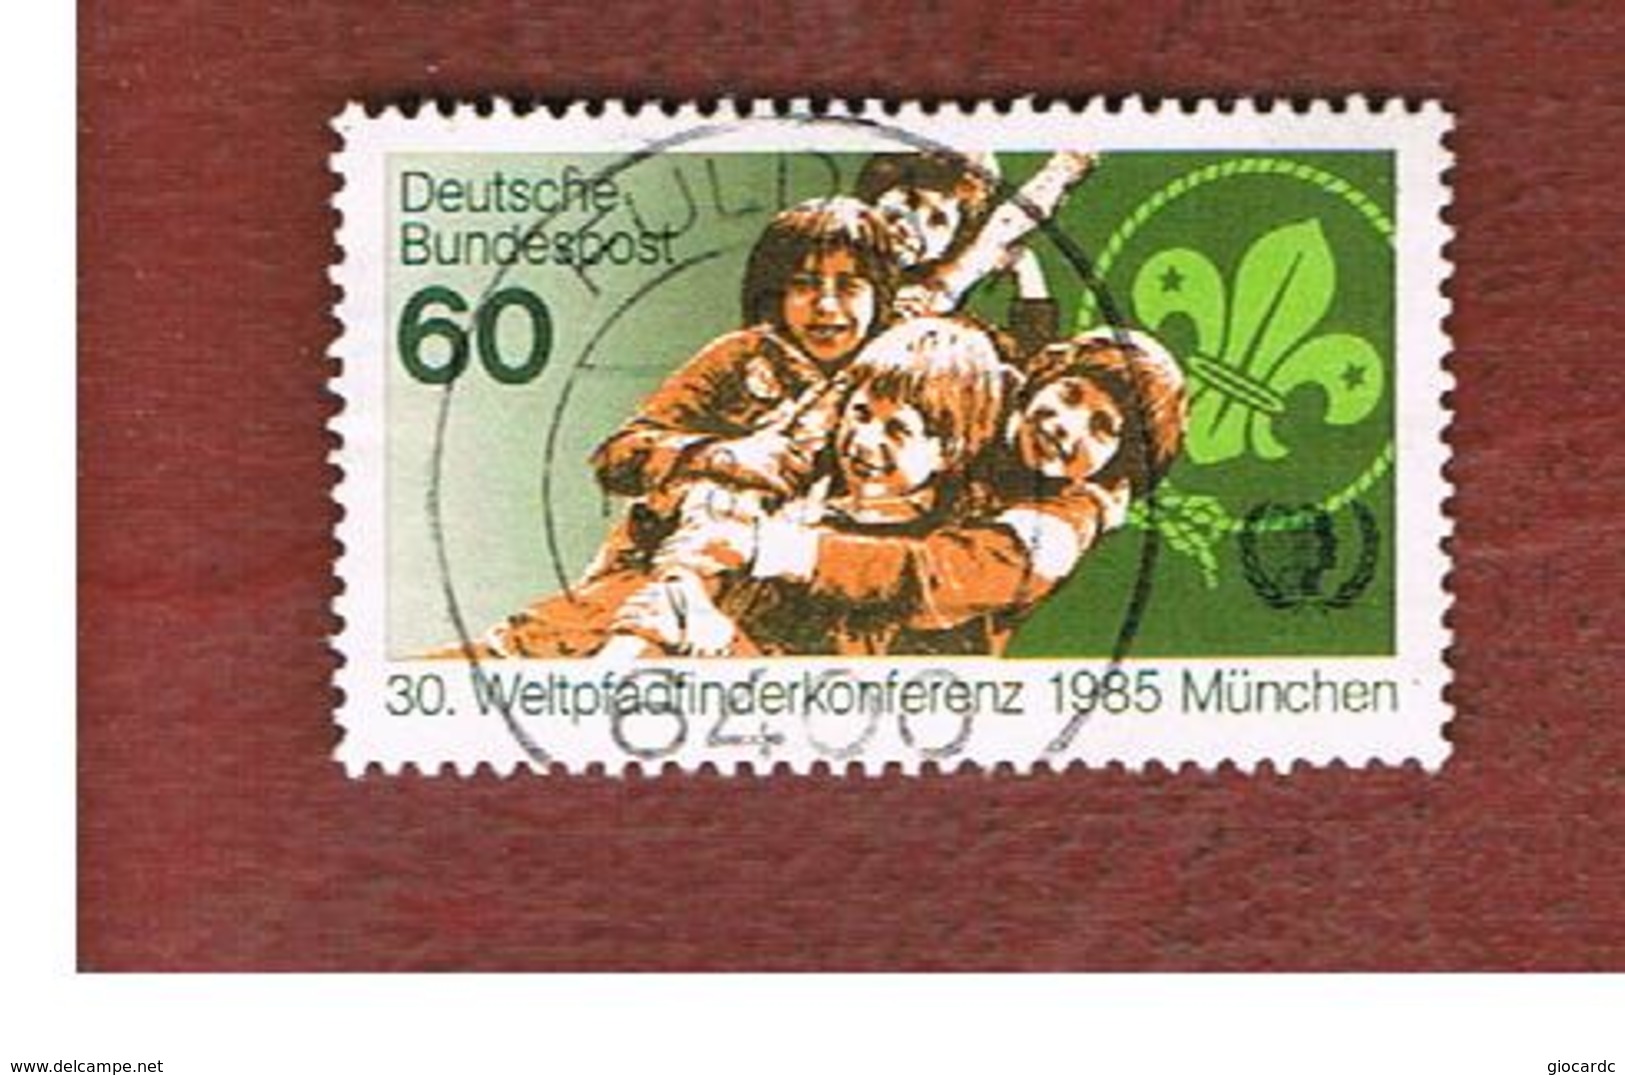 GERMANIA (GERMANY) - SG 2102 - 1985 WORLD SCOUTS CONFERENCE  -   USED - Oblitérés